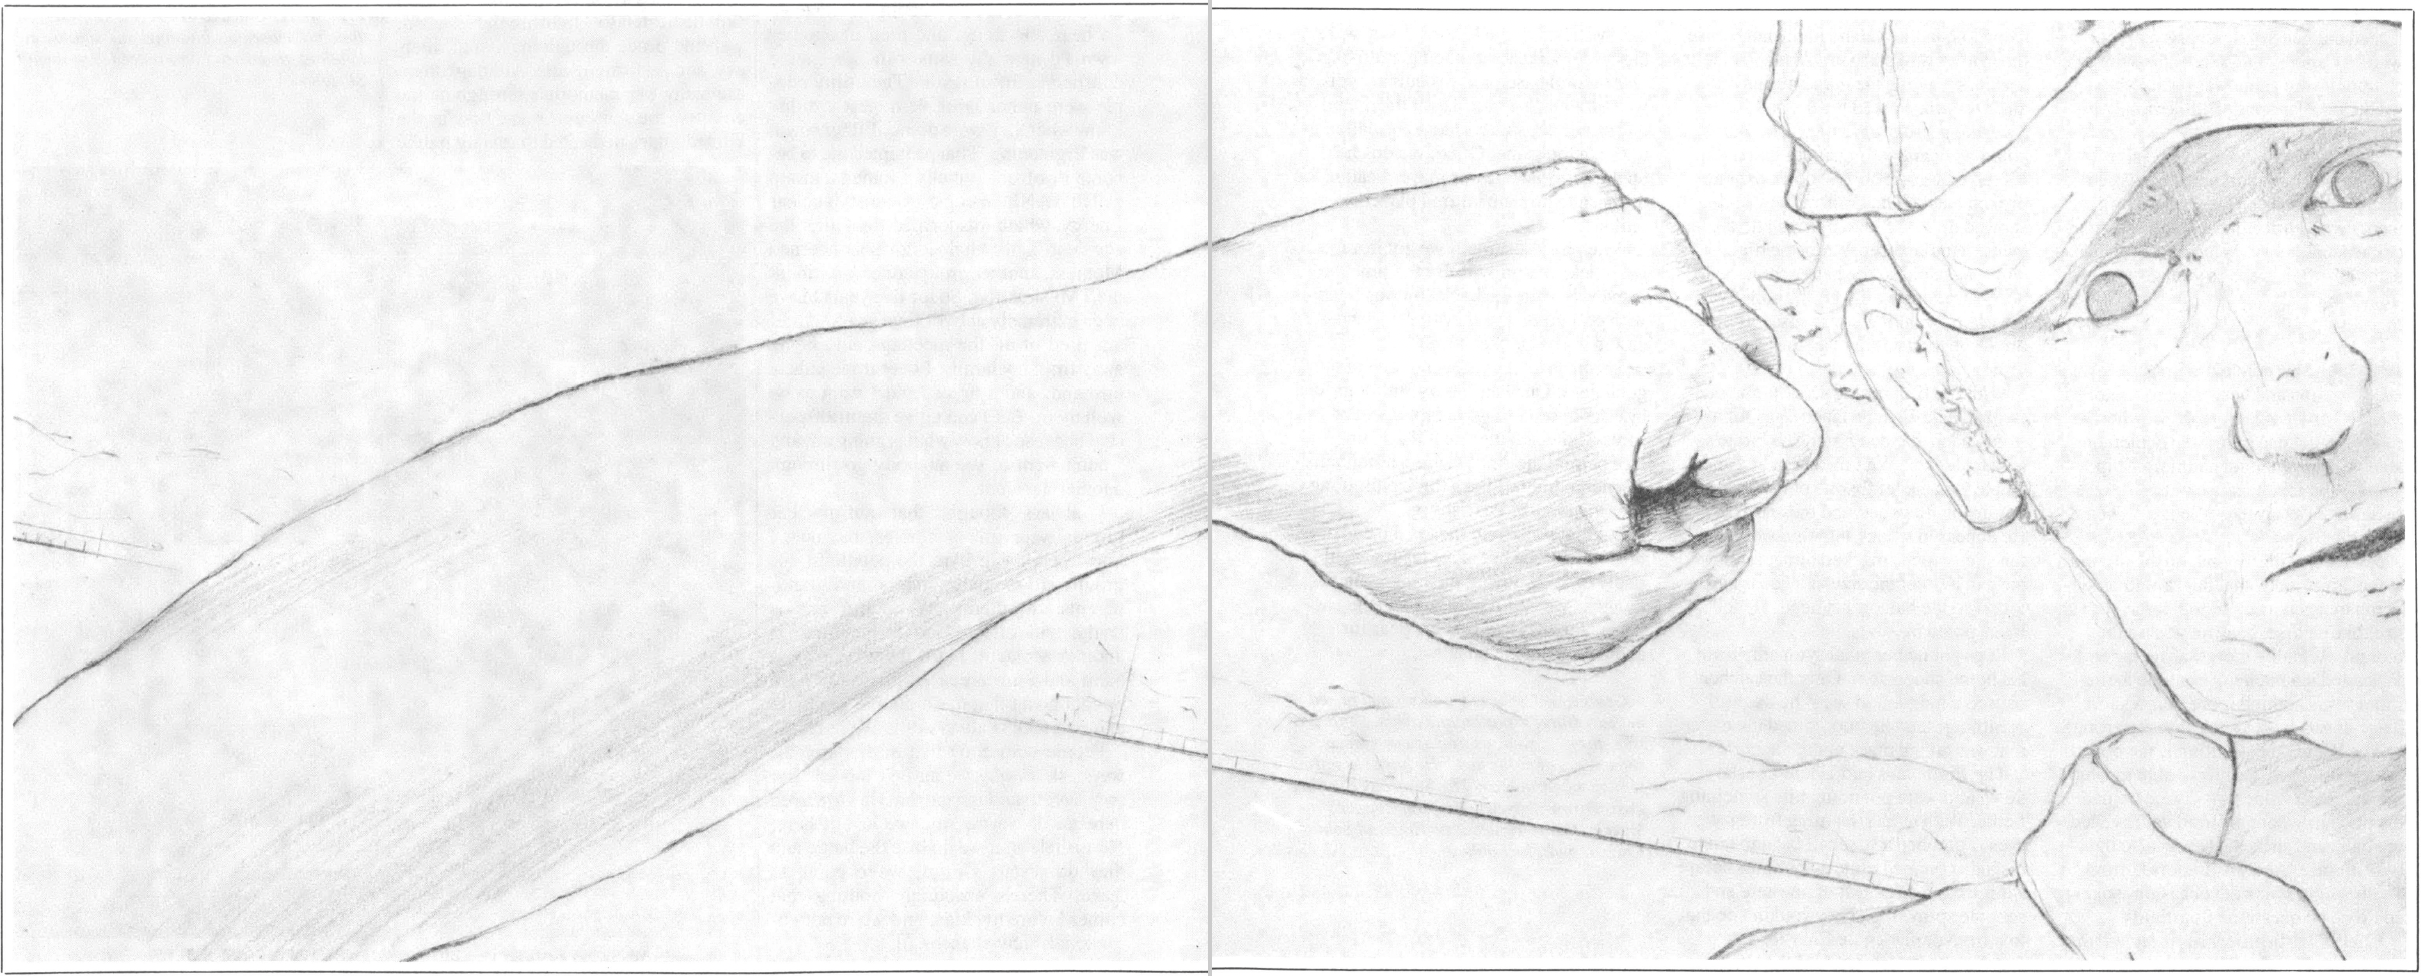 Black and white sketch illustration of a closed fist about to hit a man in a baseball hat.